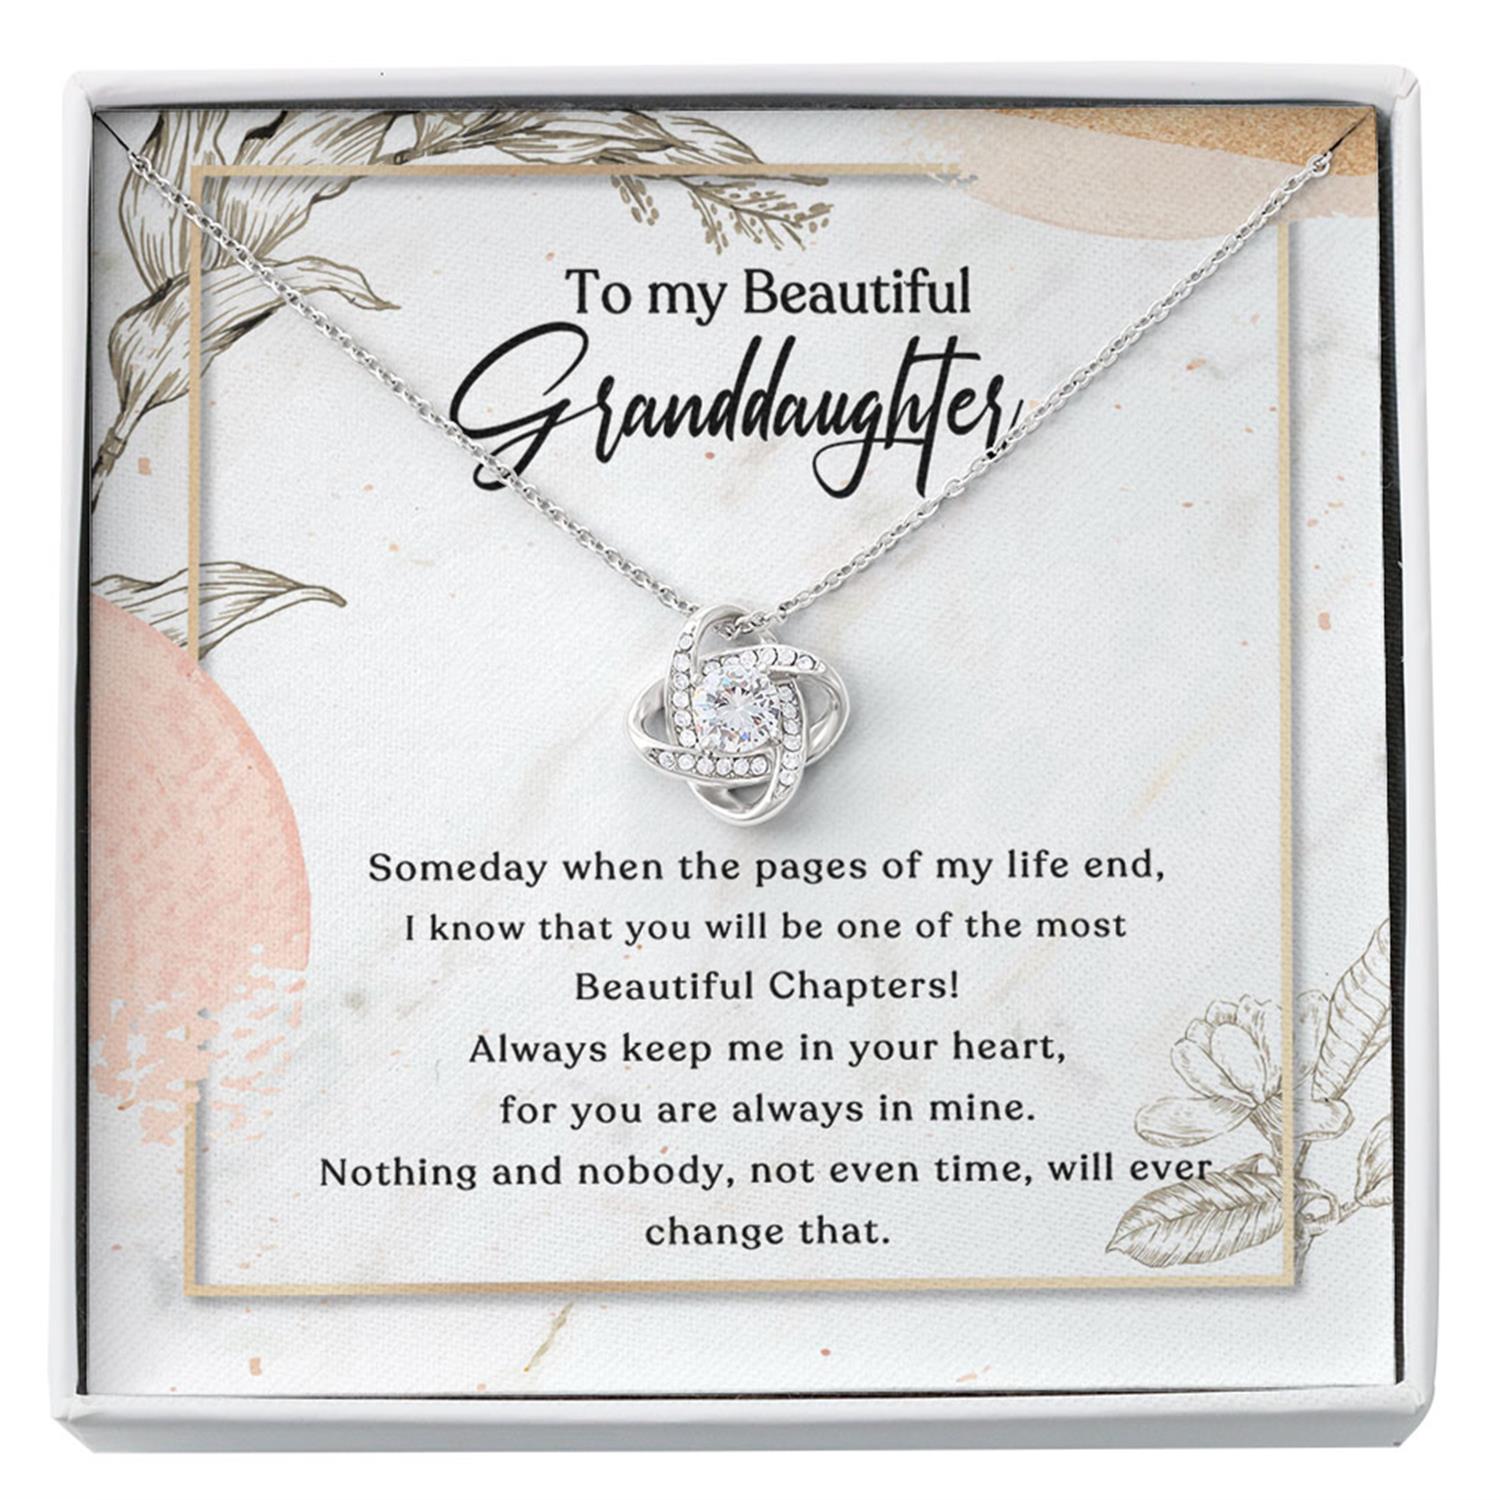 Granddaughter Necklace, To My Granddaughter Gift, To My Beautiful Granddaughter Someday When The Pages Of My Life End Custom Necklace